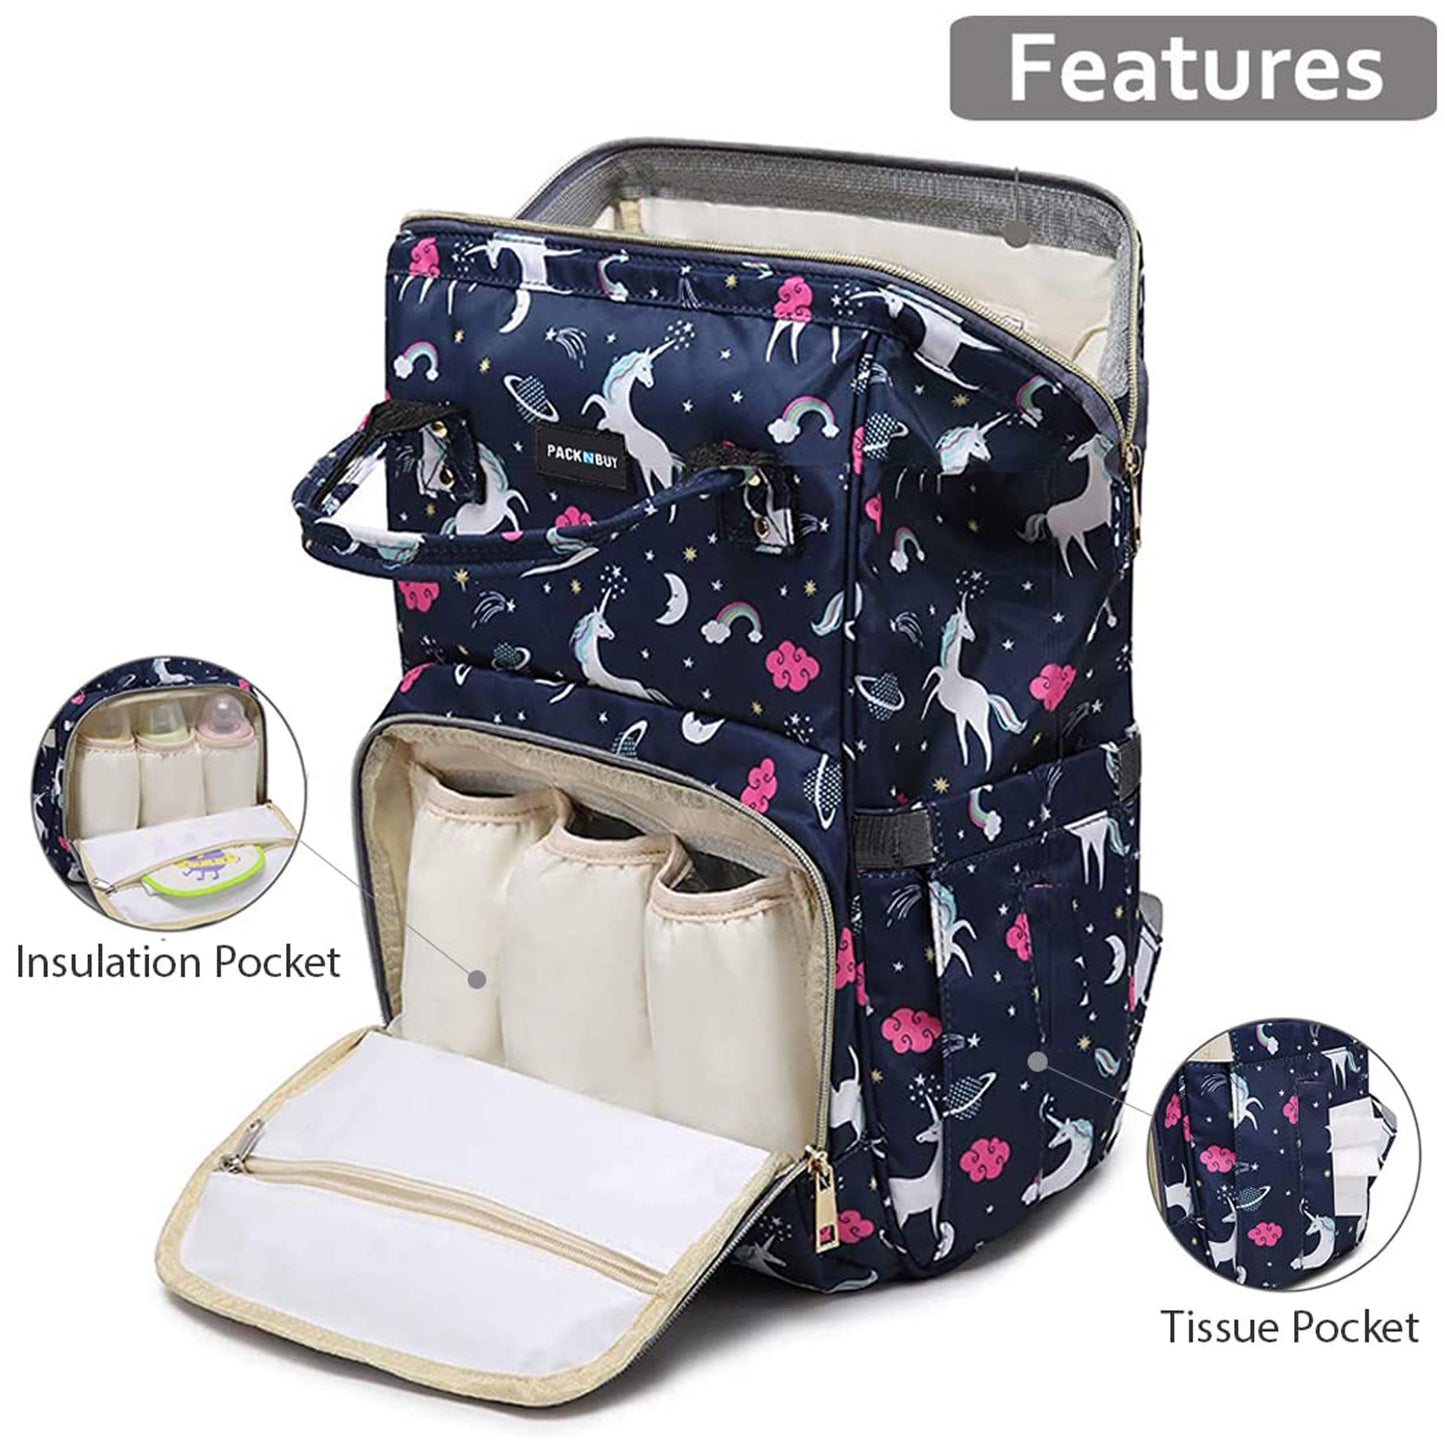 New Diaper Bag for Mothers Stylish Big Size Spacious | Waterproof Diaper Tote with Large Capacity Bottle Insulation for Mom Dad